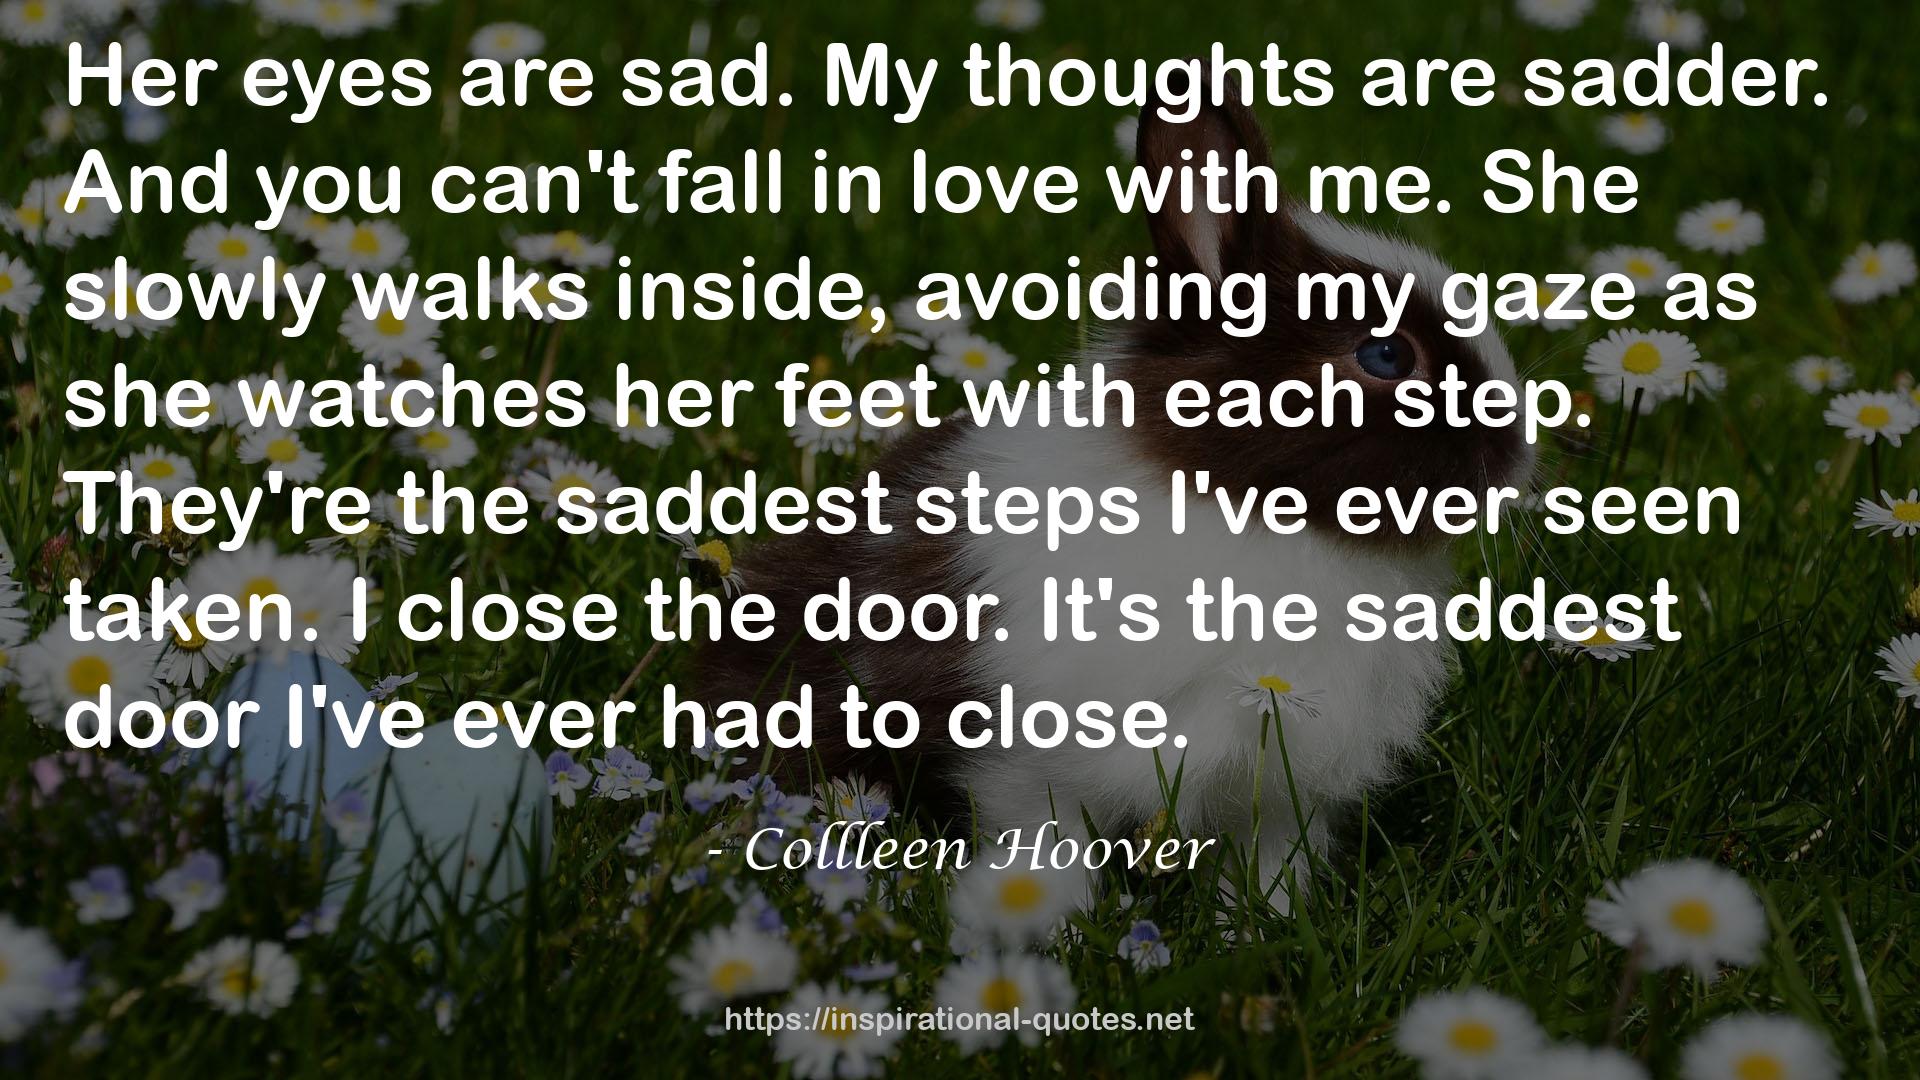 Collleen Hoover QUOTES